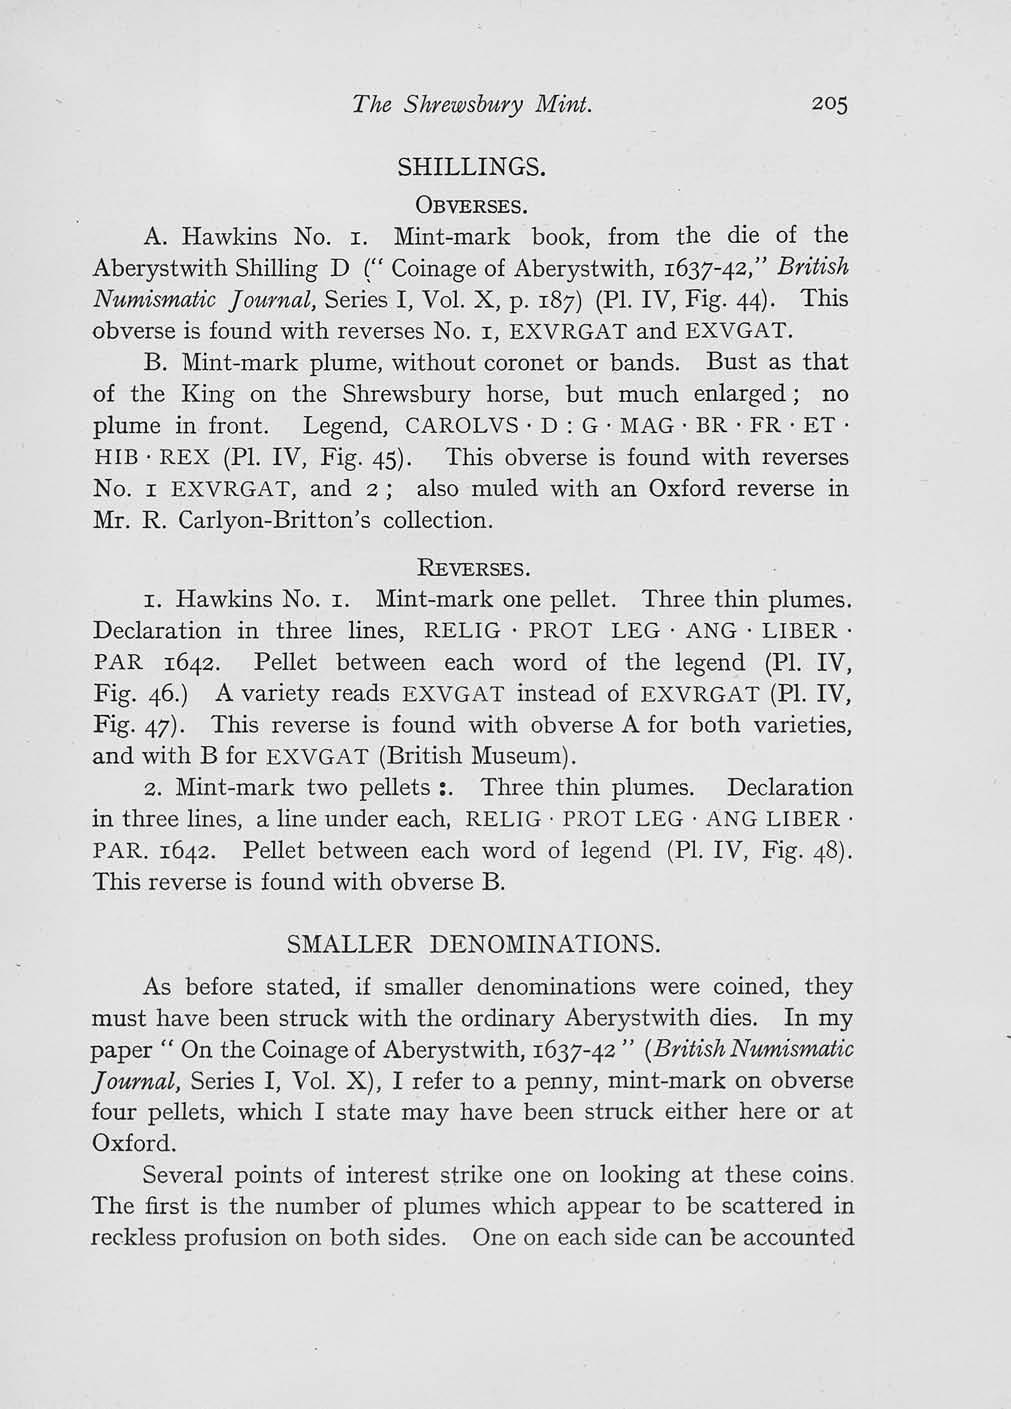 The Shrewsbury Mint. SHILLINGS. OBVERSES. A. Hawkins No. 1. Mint-mark book, from the die of the Aberystwith Shilling D (" Coinage of Aberystwith, 1637-42," British Numismatic Journal, Series I, Vol.